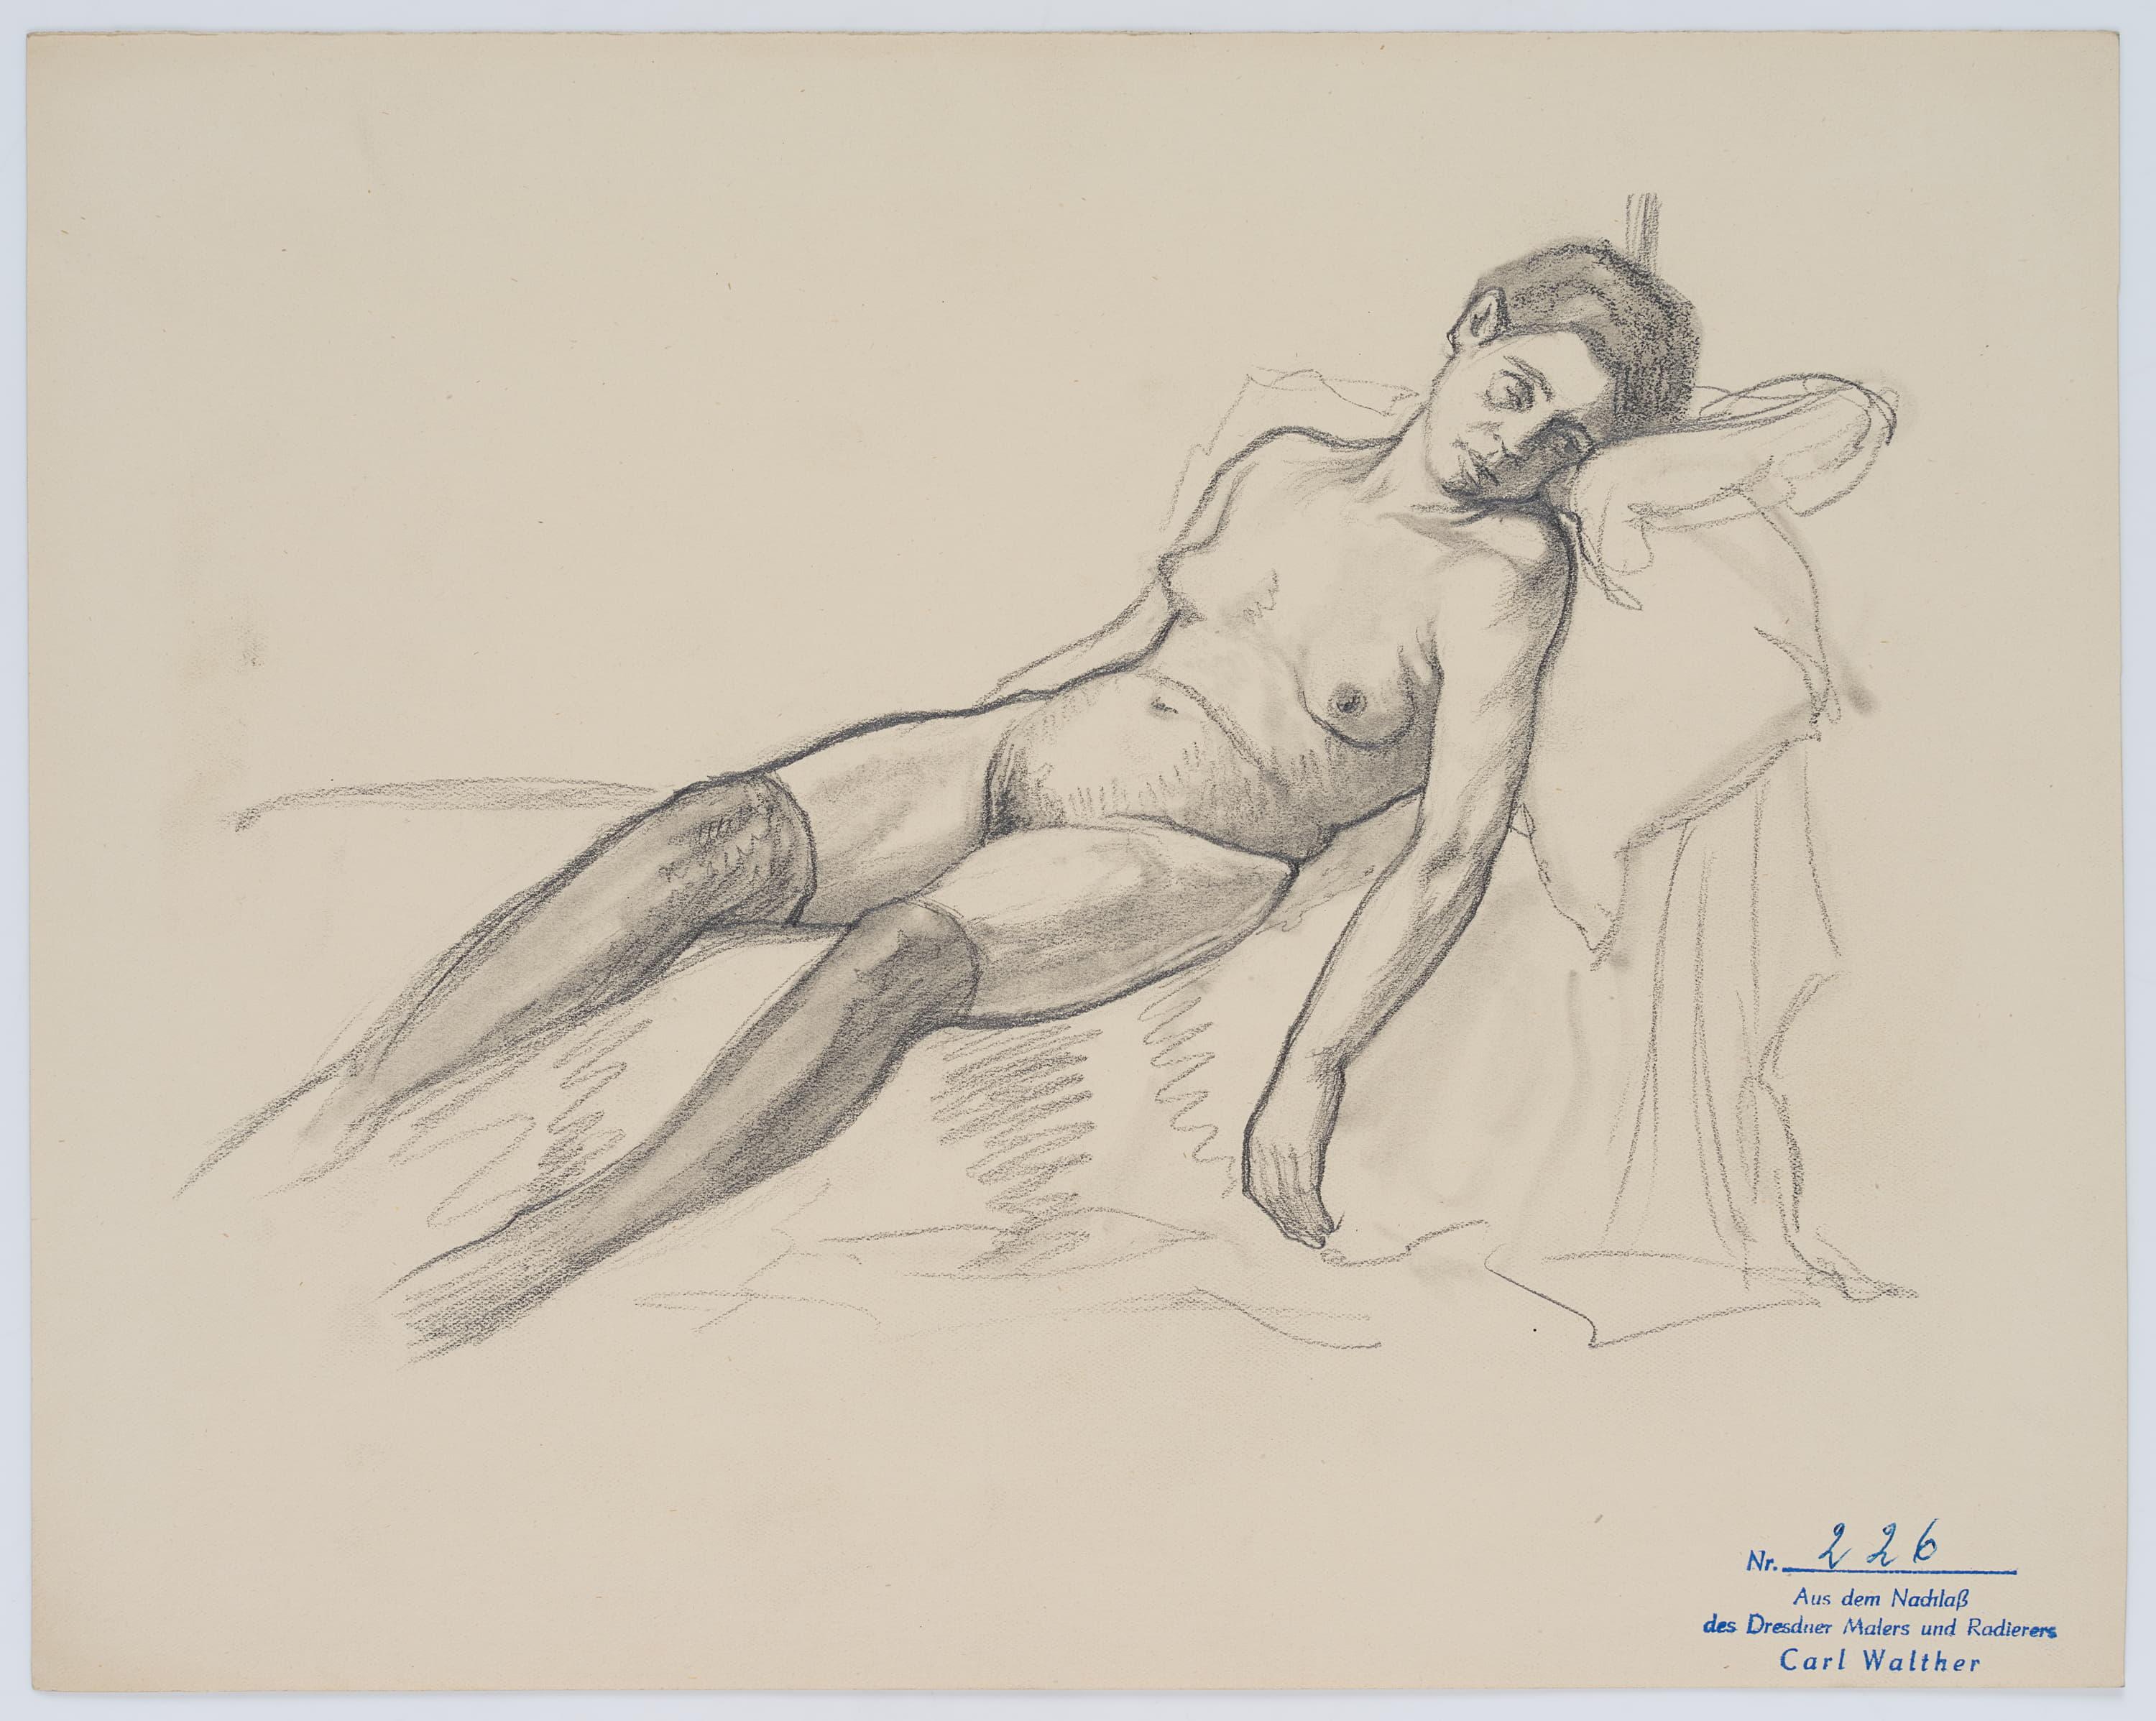 Carl August Walther (1880 Leipzig - 1956 Dresden): Reclining, Female Nude Bedded on Cushion, c. 1910, Charcoal

Technique: Charcoal and Pencil on Paper

Stamp: At the bottom Estate stamp, Carl Walther. Dresden. 20th century

Date: c.